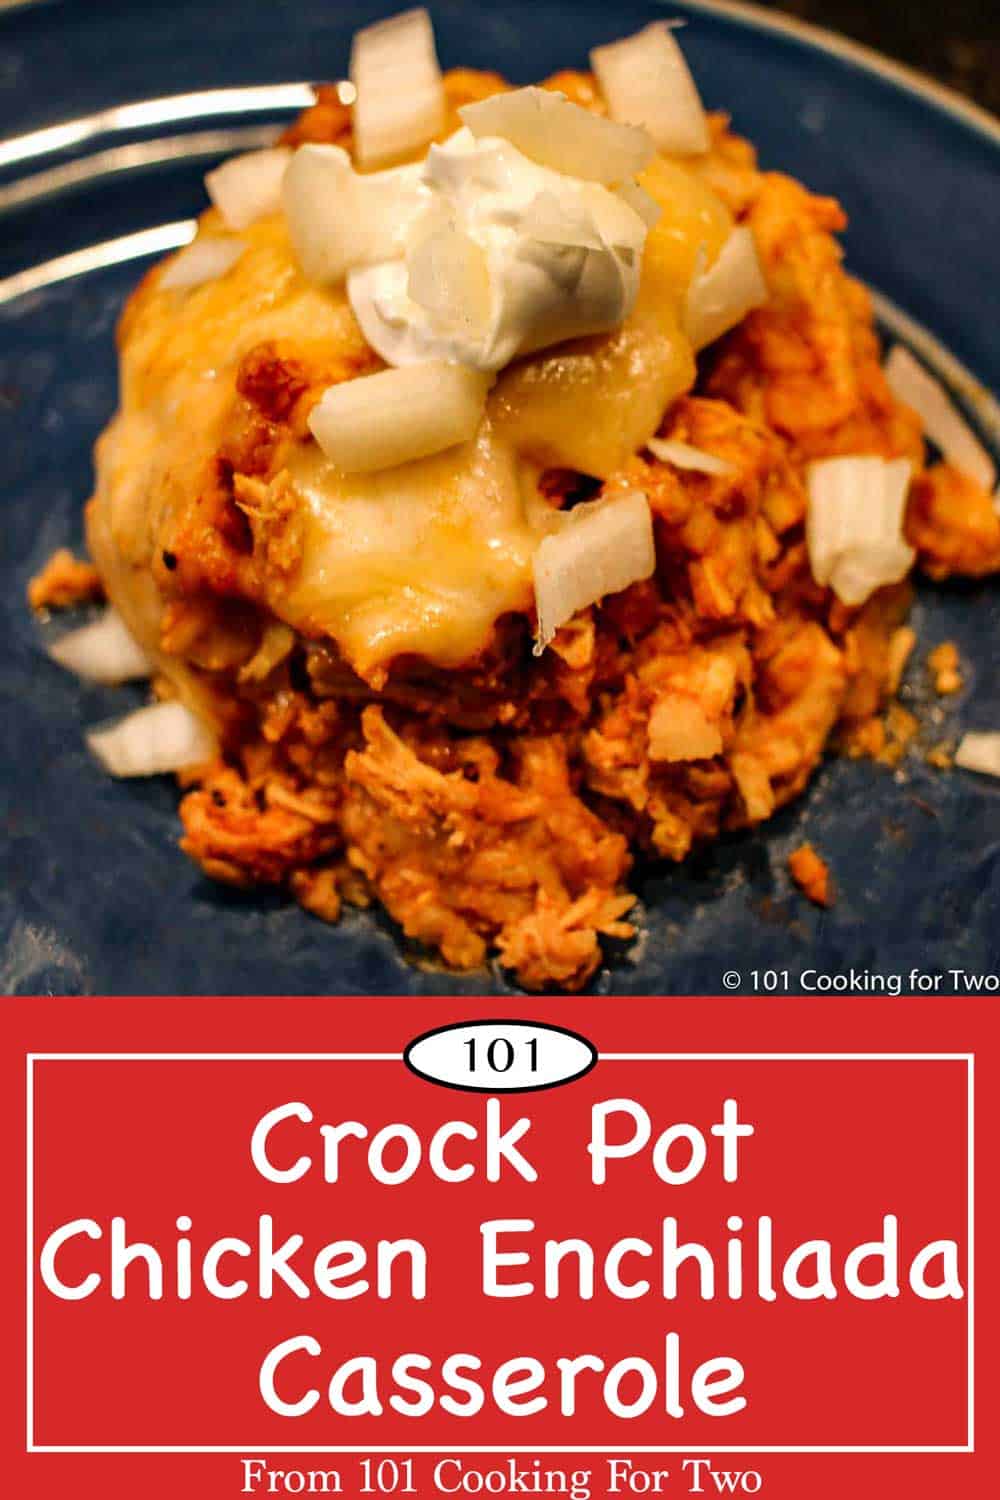 Crock Pot Chicken Enchilada Casserole | 101 Cooking For Two